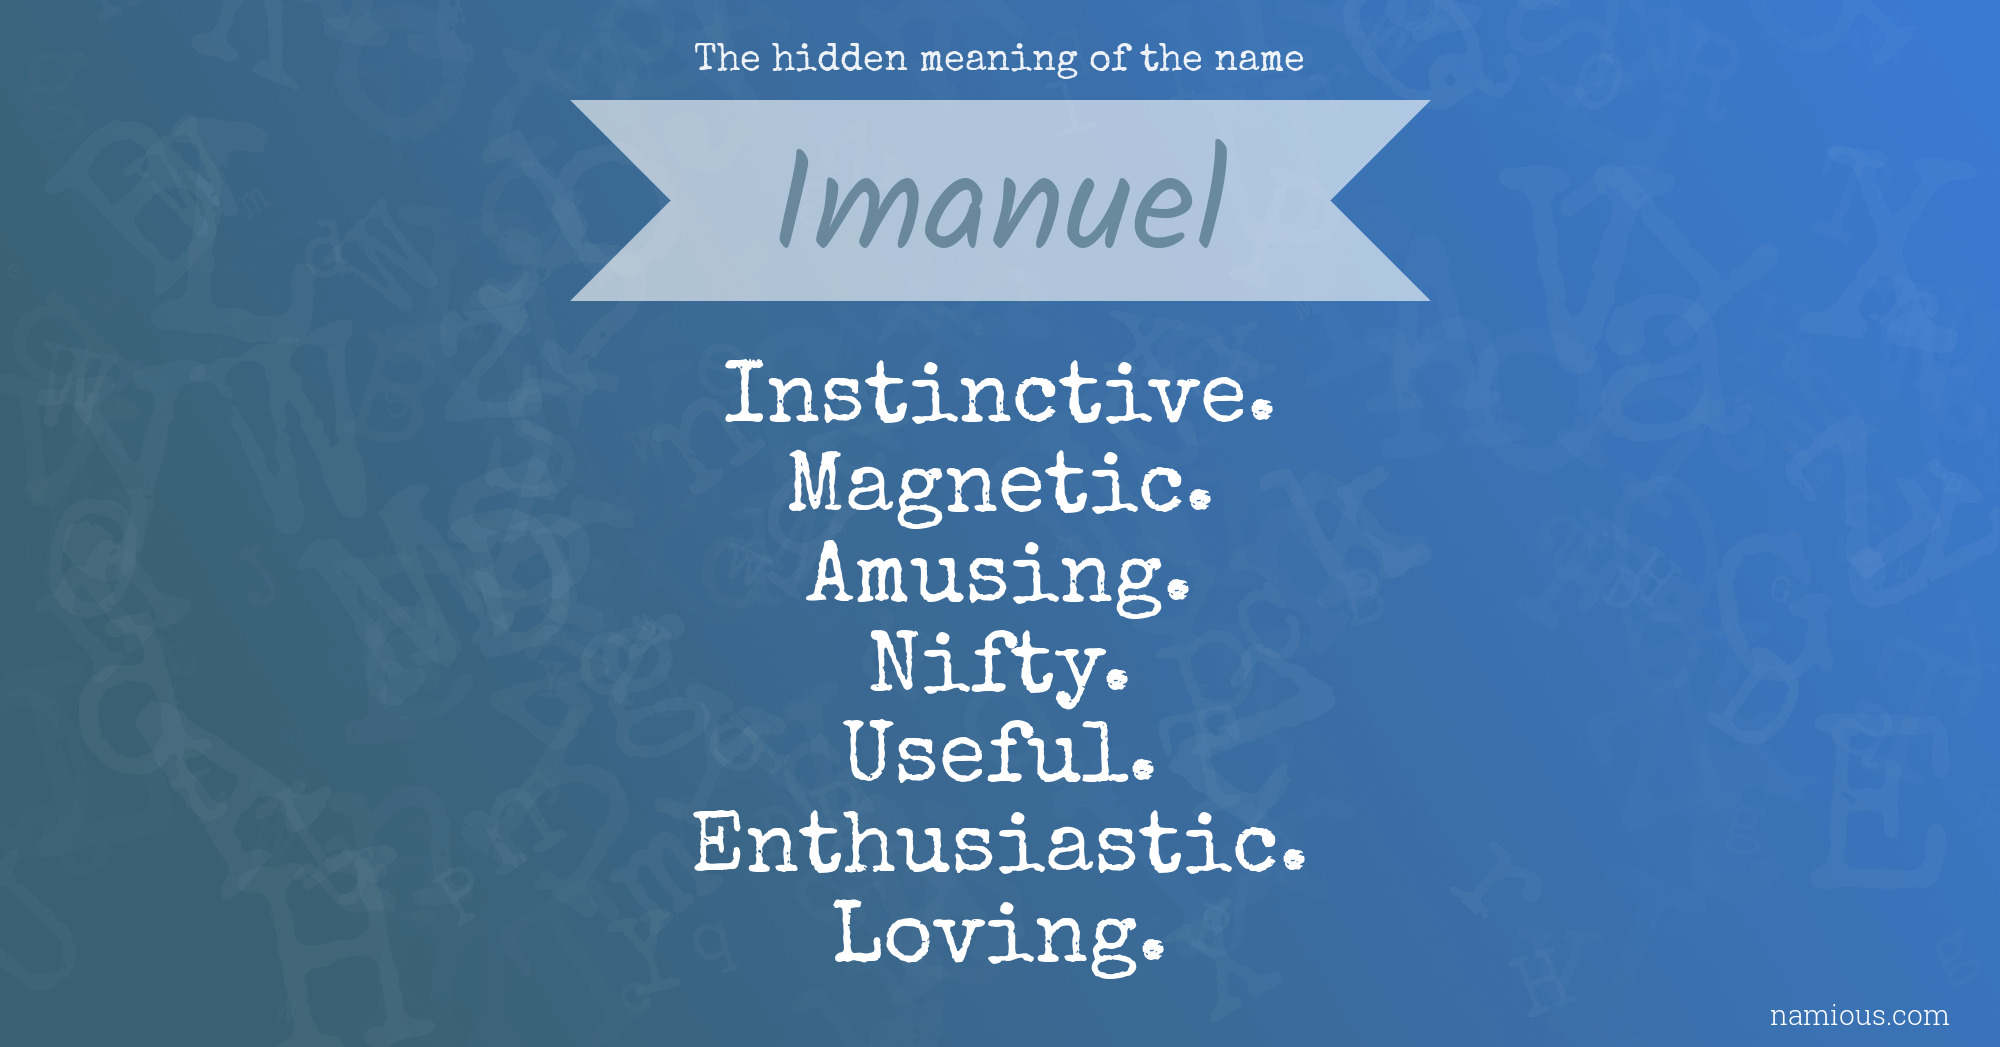 The hidden meaning of the name Imanuel